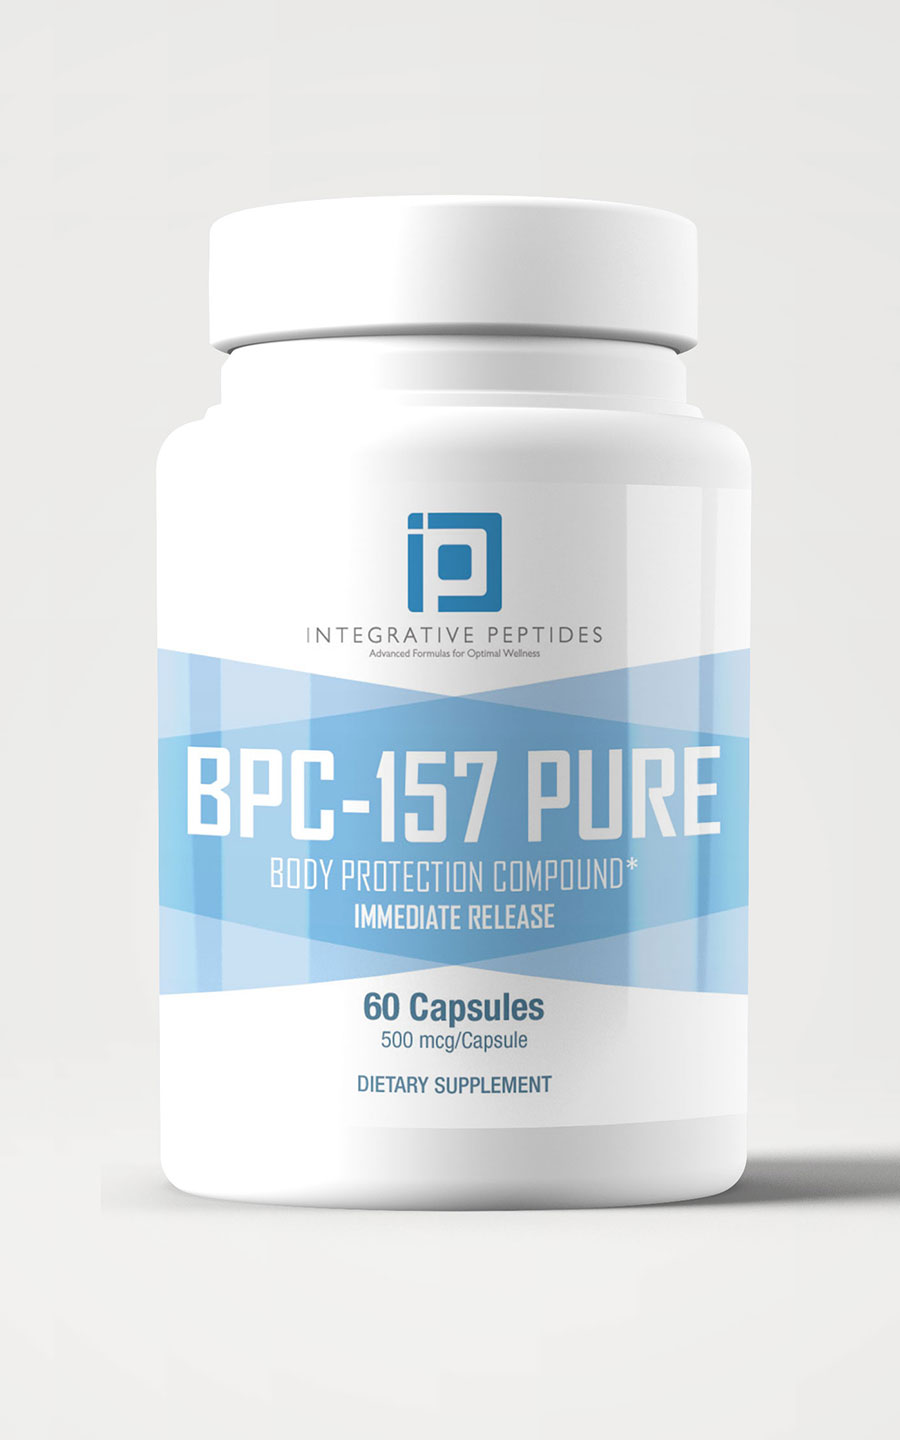 With BPC 157, you can expect enhanced muscle and bone healing, reduced inflammation, improved mental health, and a faster recovery time for injuries. But how does it work? BPC 157 works by increasing the expression of certain proteins that promote cell growth and regeneration. In simpler words, it helps your body heal itself.